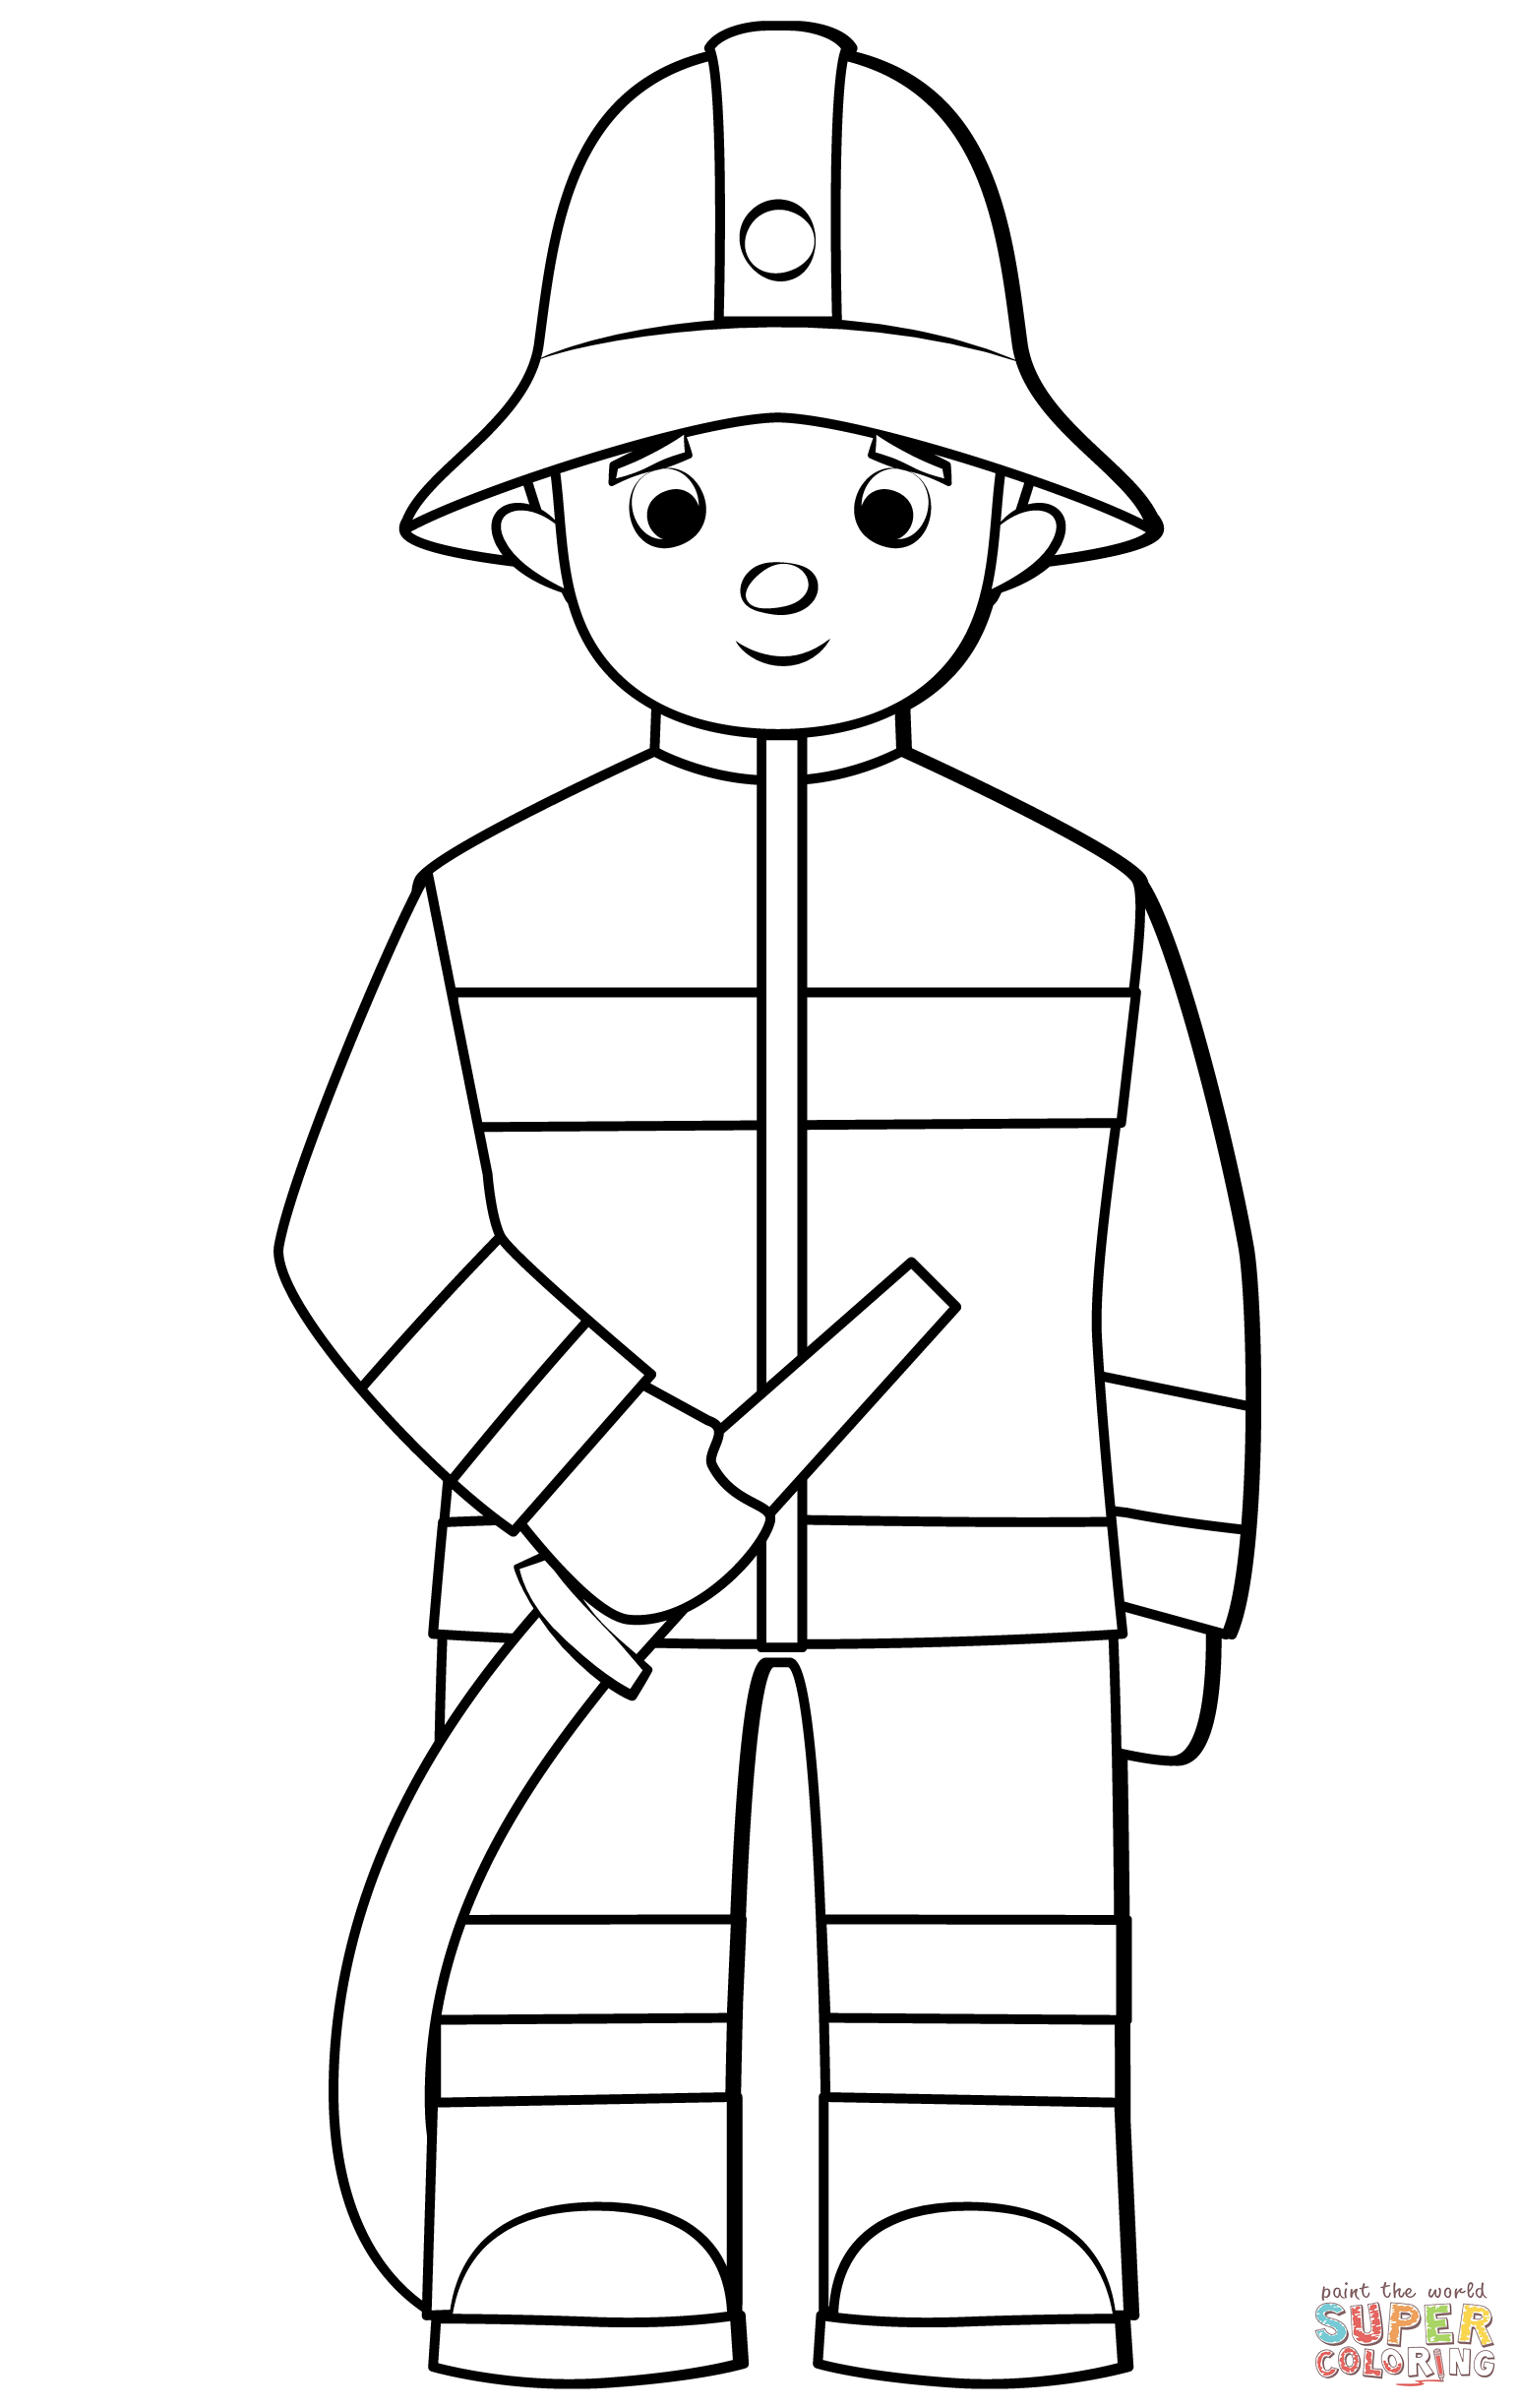 Firefighter coloring page free printable coloring pages